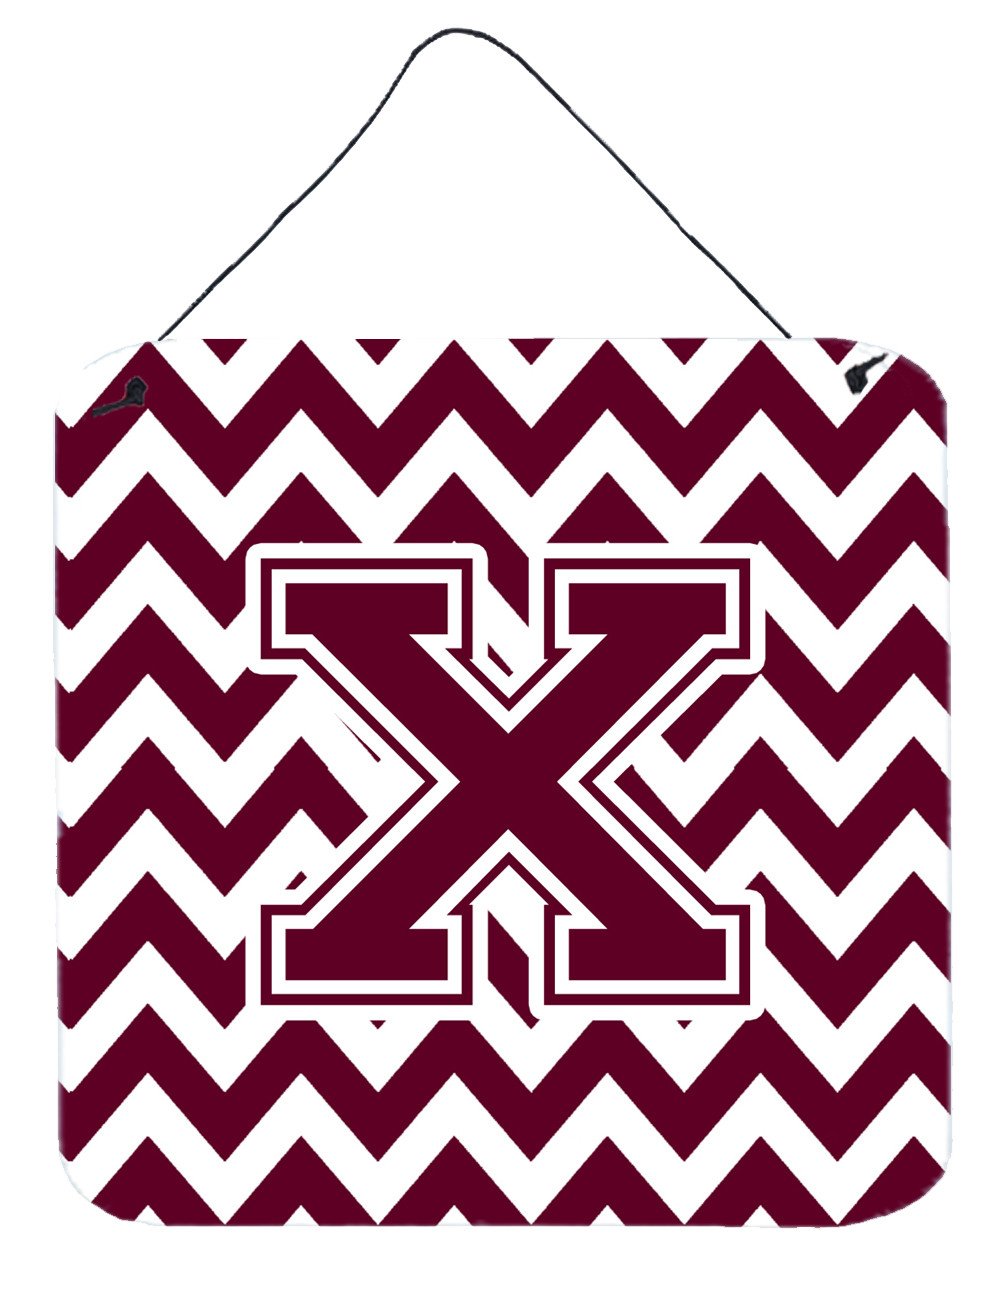 Letter X Chevron Maroon and White  Wall or Door Hanging Prints CJ1051-XDS66 by Caroline's Treasures